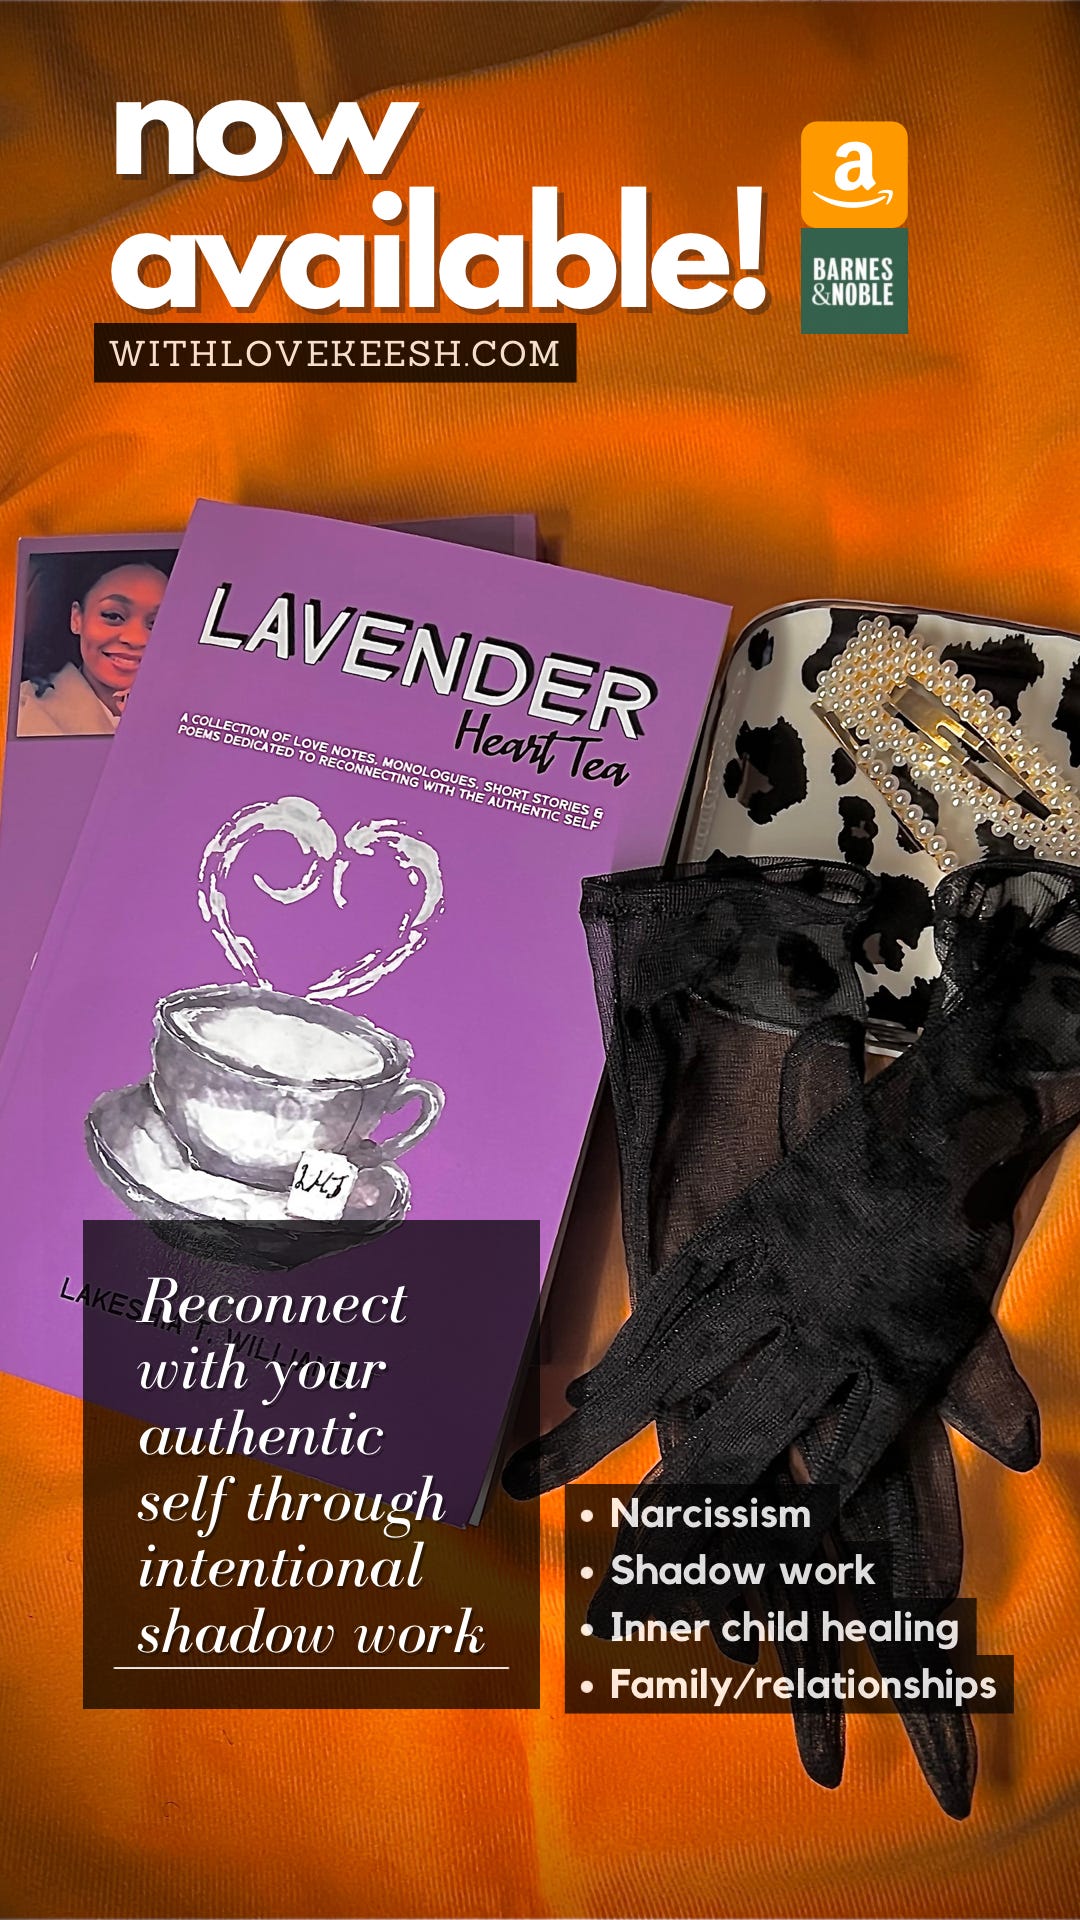 Lavender Heart Tea “Material Gworl” Pinterest Ad (photo)Keep "Doing the Most:" 7 tips on How to be Your Most Authentic, Confident Self + "Material Gworl" Pinterest Ad: Intro to my upcoming course, Keesh the Biz Healer, to learn how to build your own Authentic brand